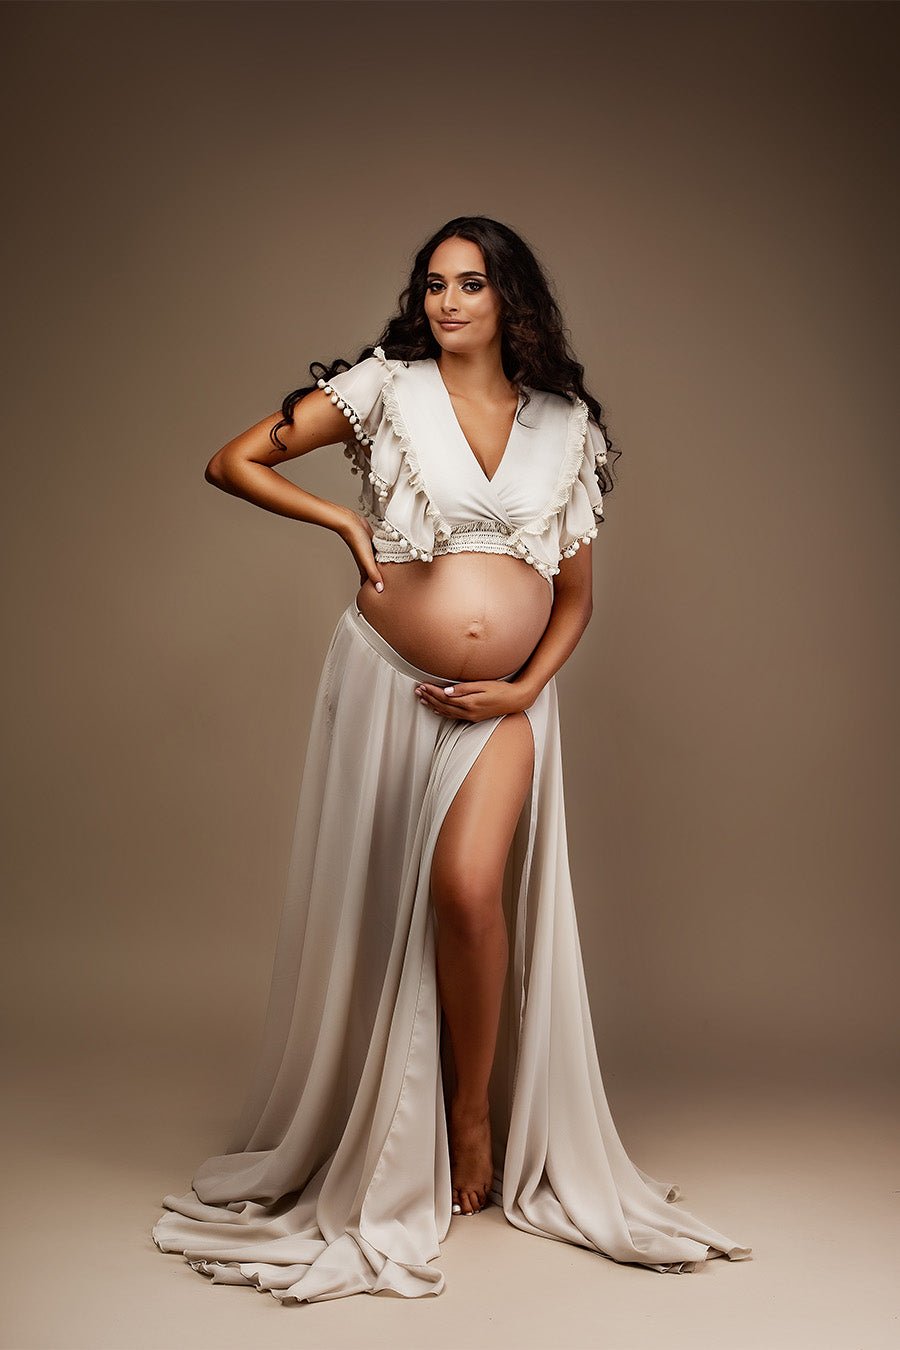 pregnant woman poses in a studio wearing a chiffon maternity set in sand color. her bely is uncovered and she is posing her hands gently in there. the top features a low v cut neckline with ruffled chiffon details. 